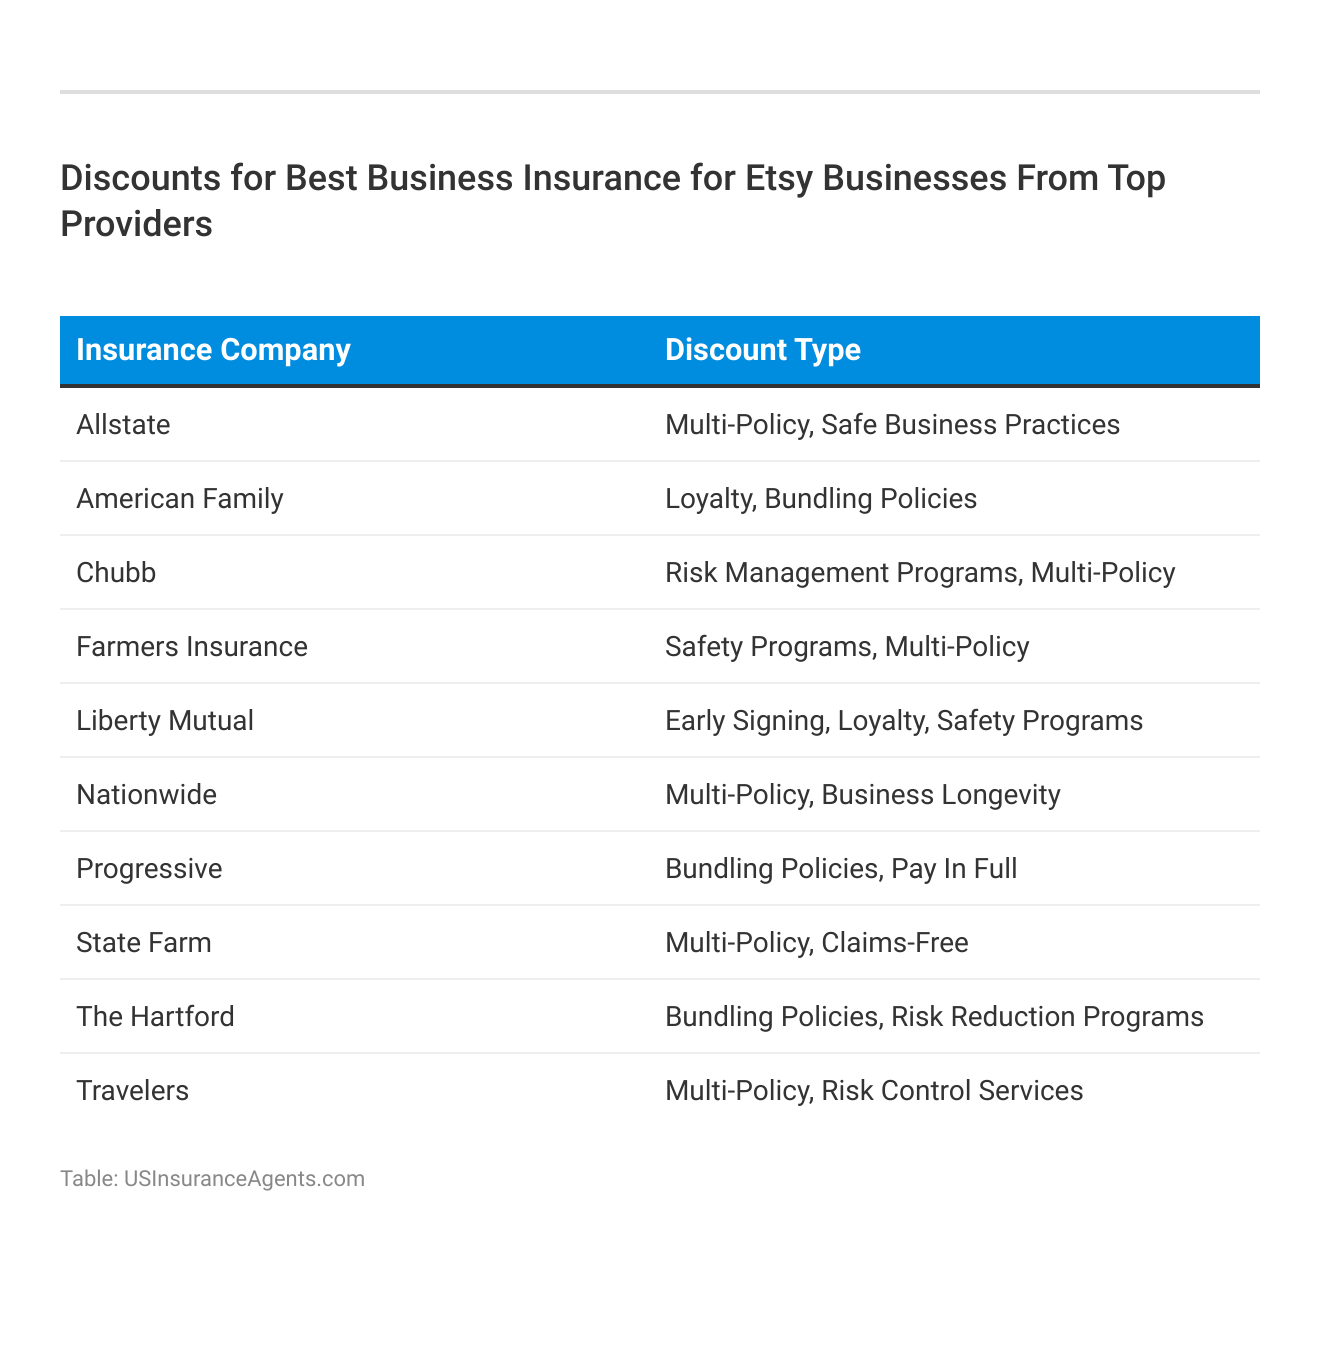 <h3>Discounts for Best Business Insurance for Etsy Businesses From Top Providers</h3>